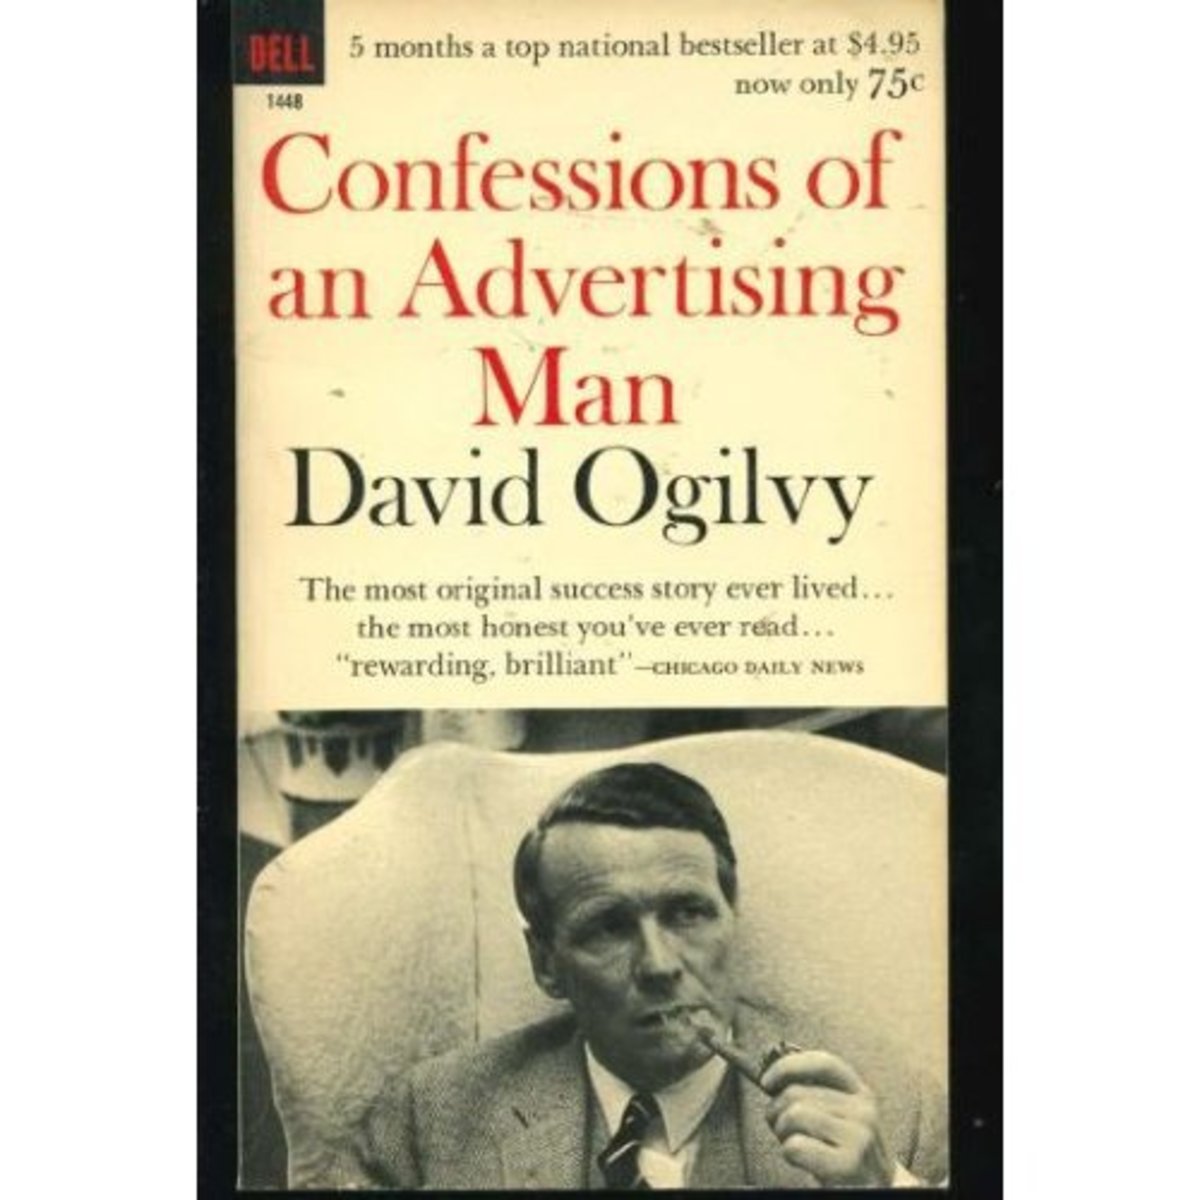 Confessions of an Advertising Man by David Ogilvy